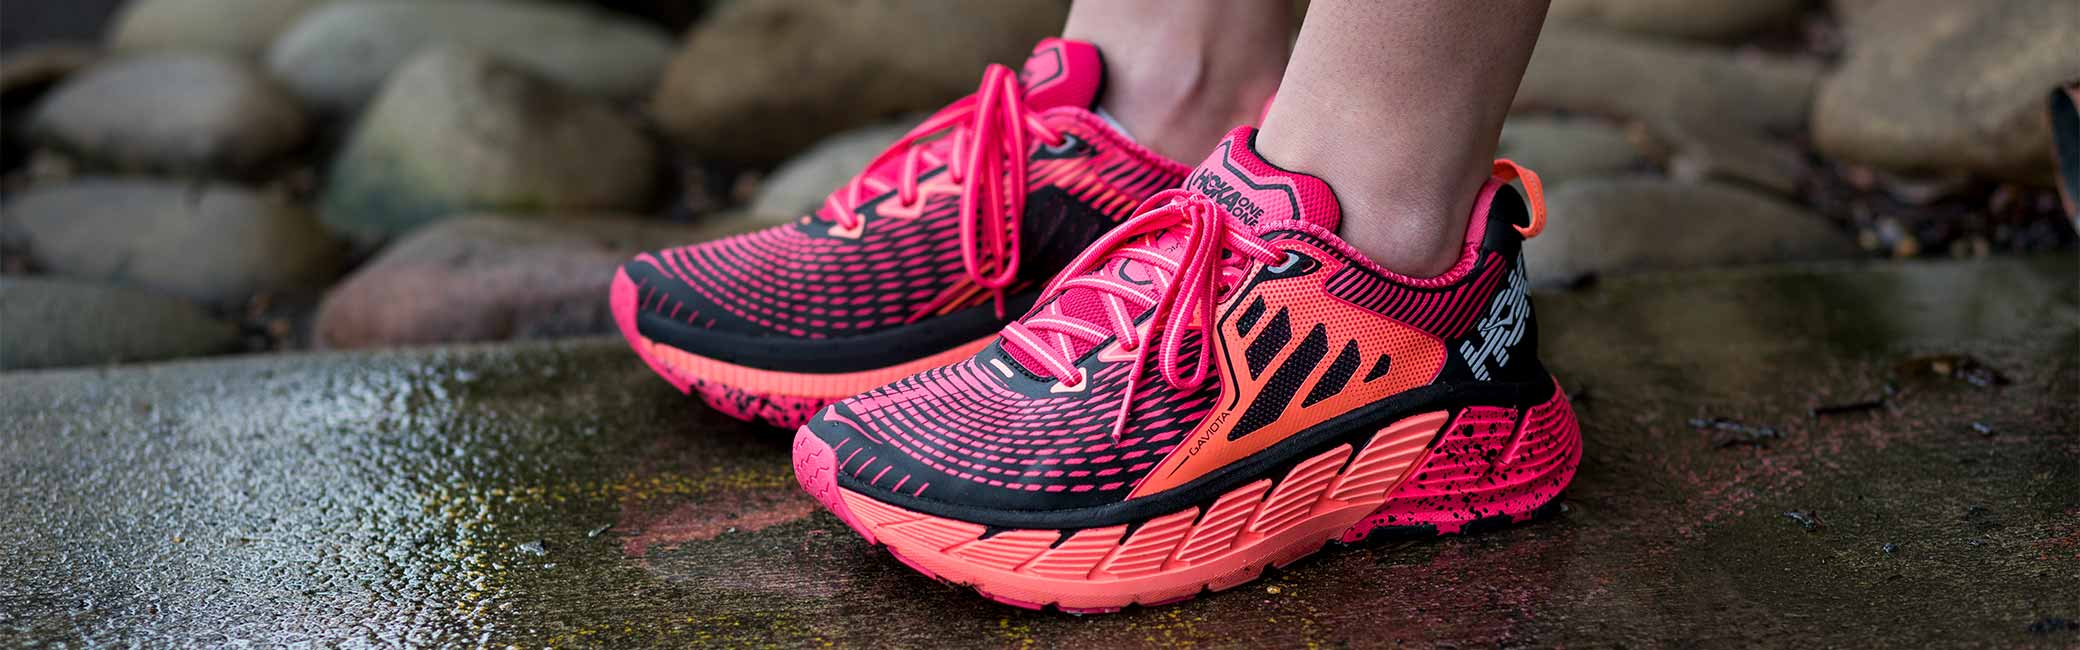 10 Best Stability Running Shoes 